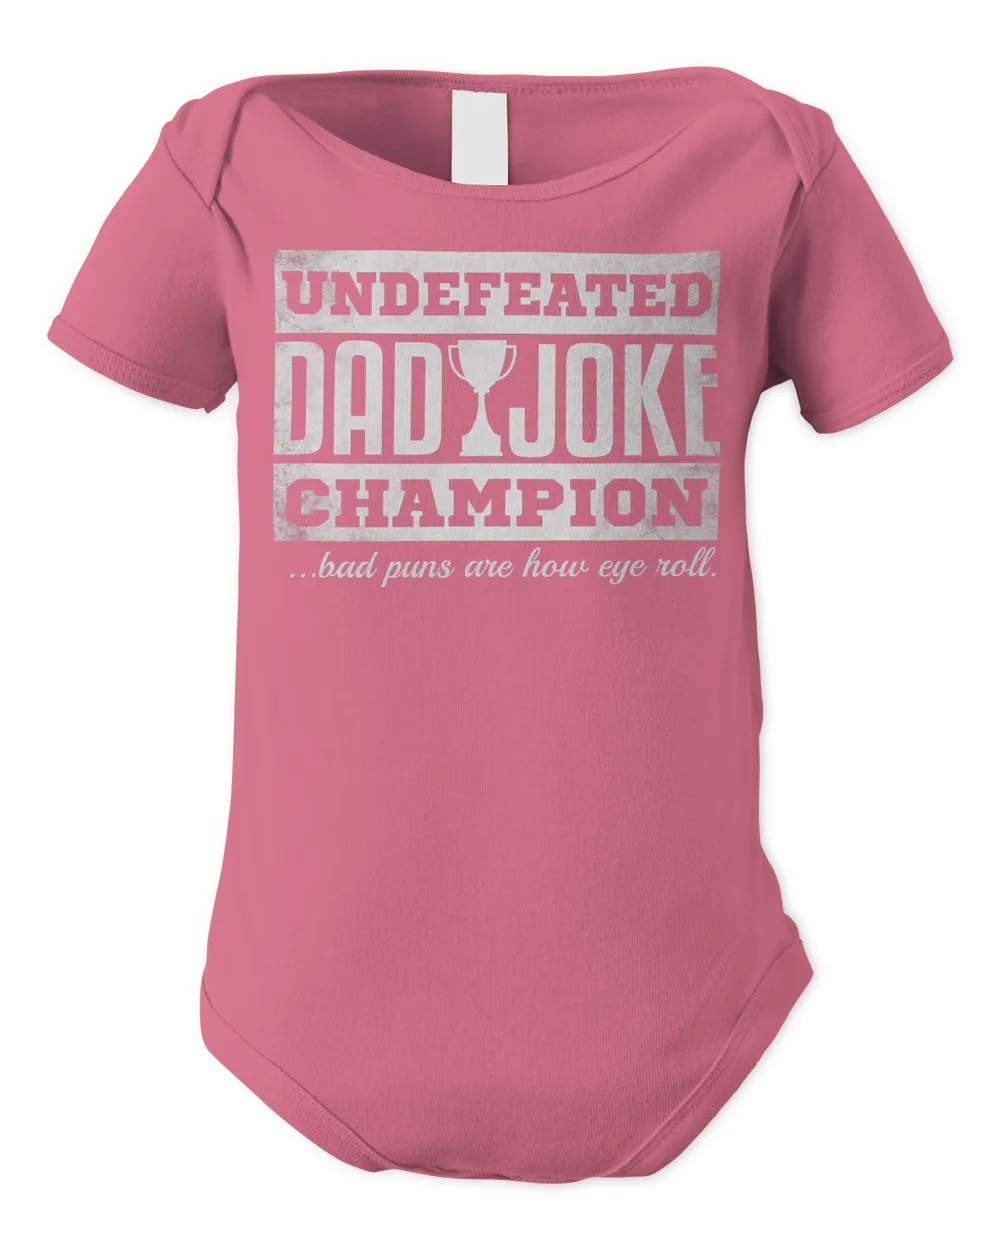 Mens Dad Joke Champion t-shirt funny father's day gift, bad puns